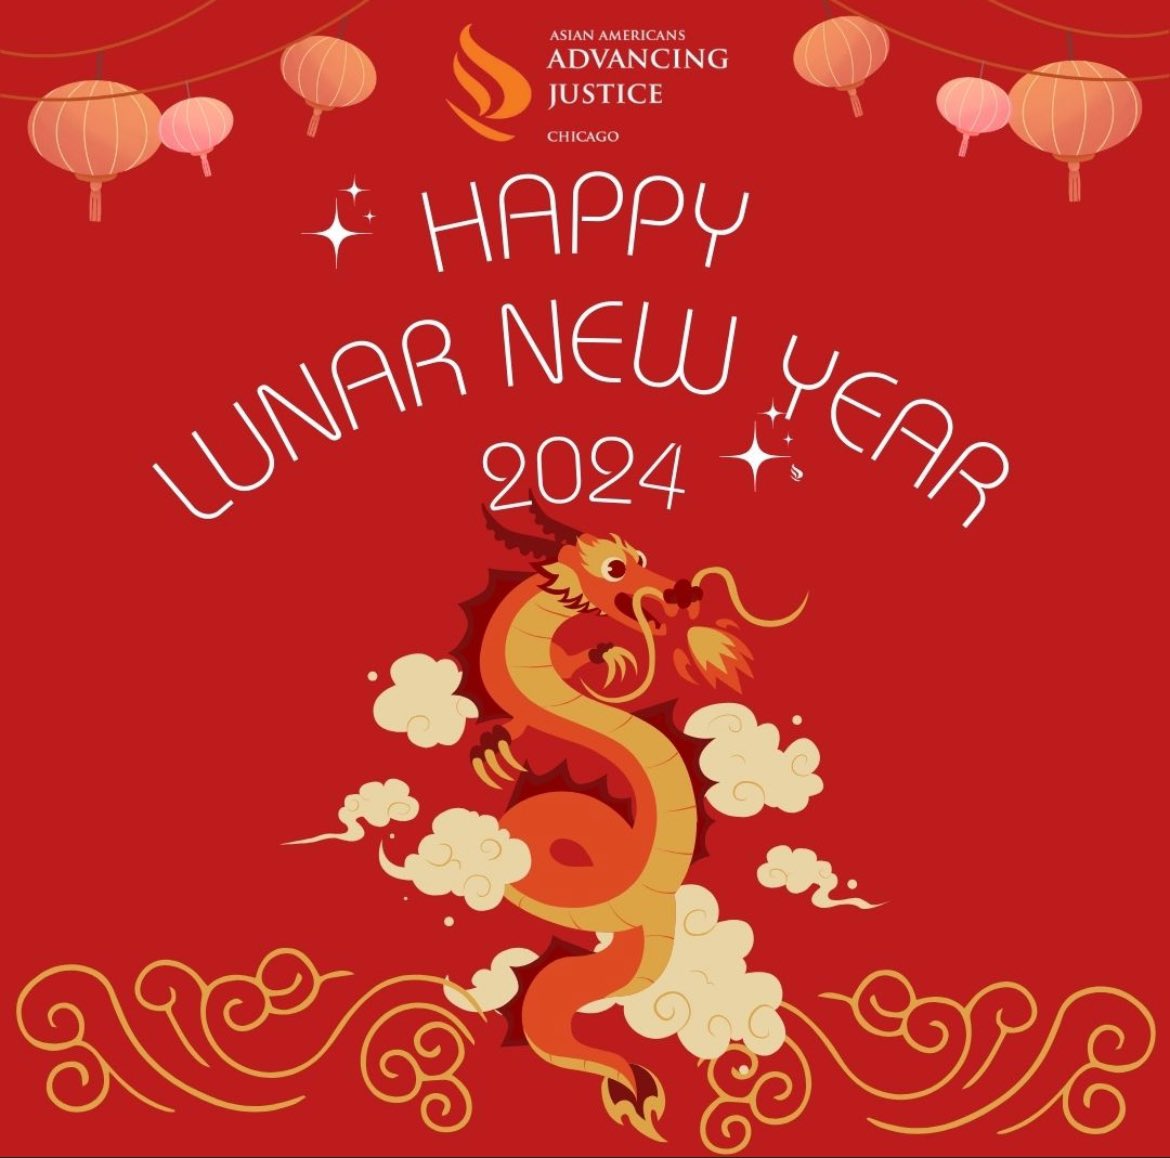 Happy Lunar New Year! Wishing everyone a prosperous Year of the Dragon from Asian American Advancing Justice | Chicago! May this lunar new year bring you abundant joy, success, and endless possibilities. #LunarNewYear #YearOfTheDragon 🐉 🧧✨